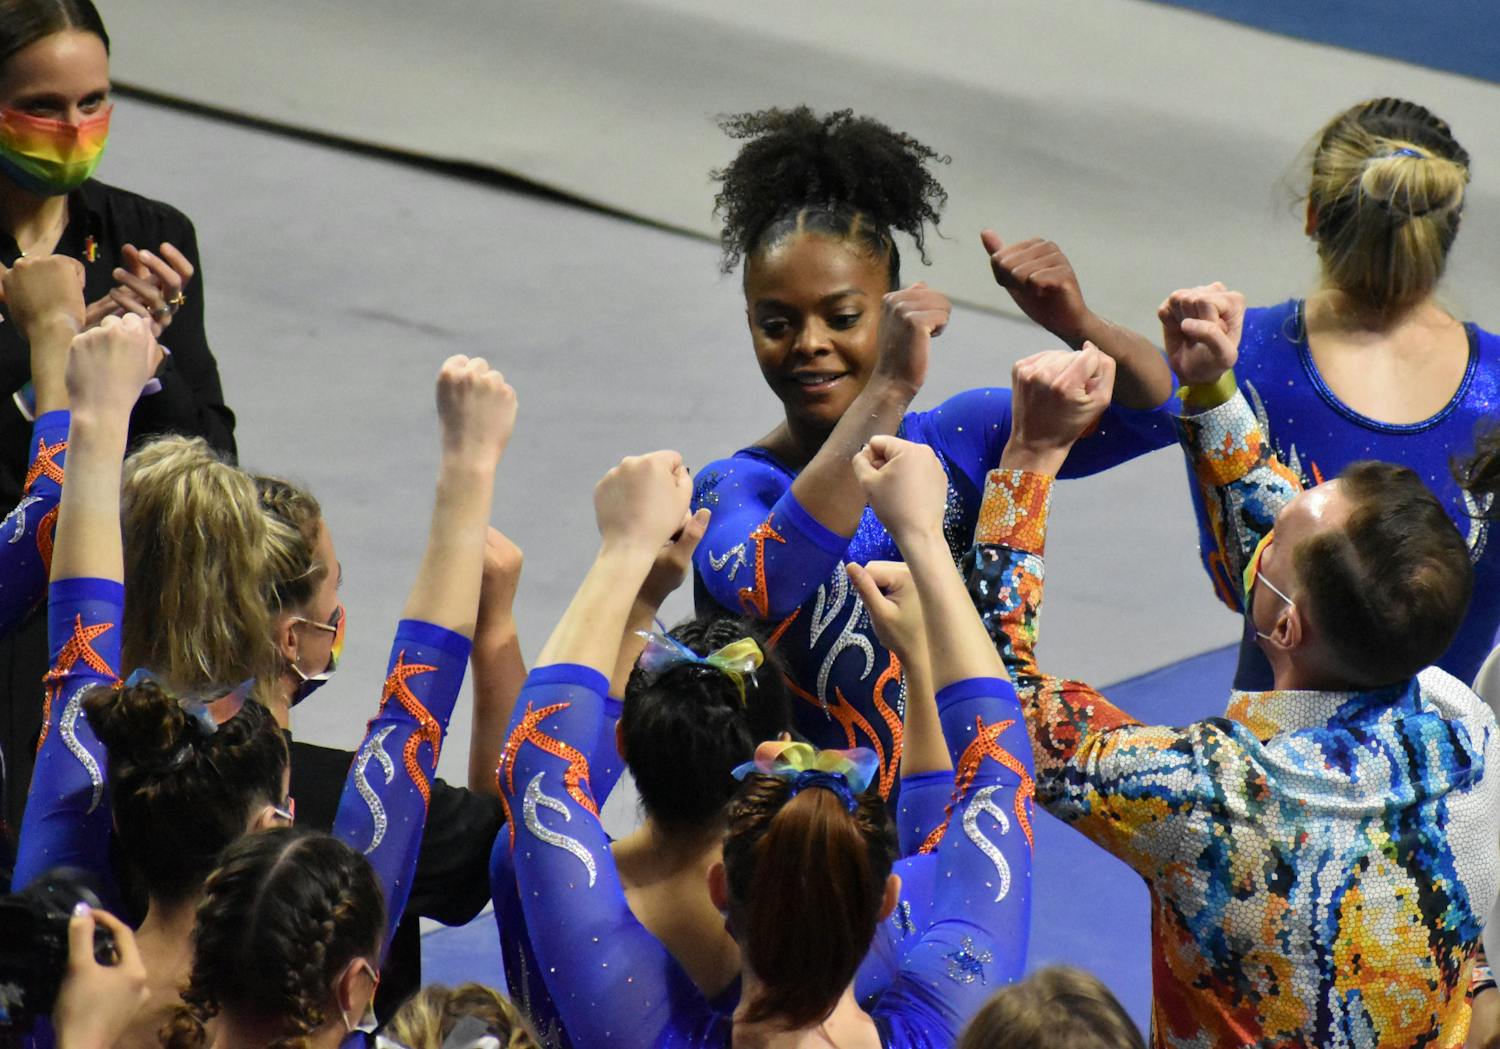 Trinity Thomas leads her team in celebration against Missouri Jan. 29, 2021. Thomas announced Monday she will return for her fifth season at UF.